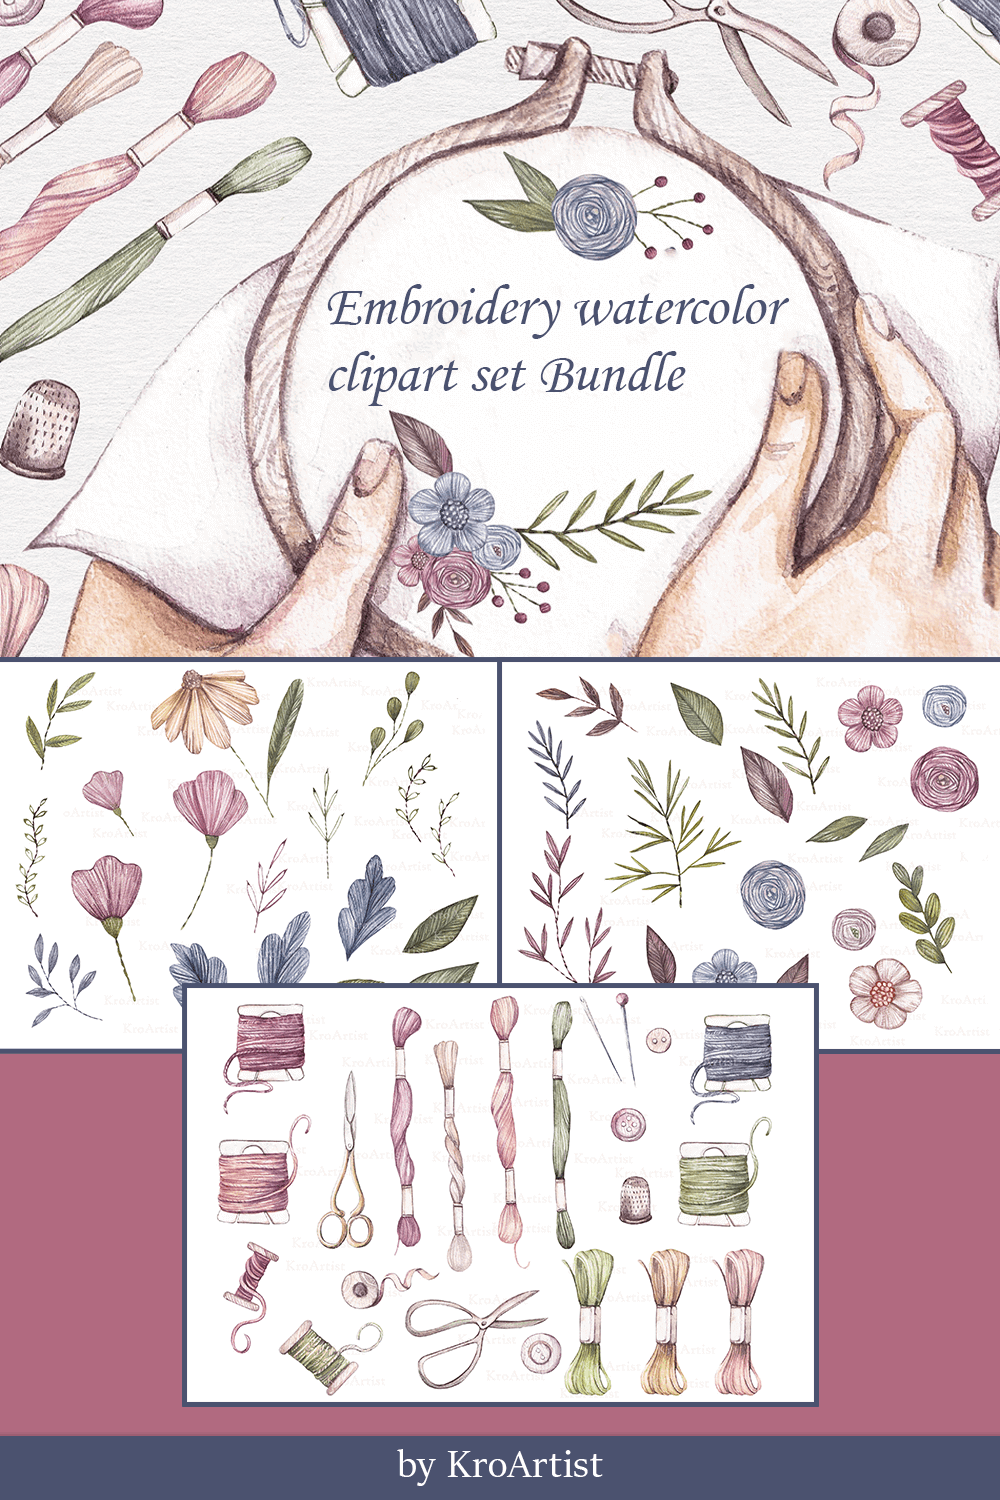 Four slides from large to small with hand-drawn watercolor embroidery for Pinterest.